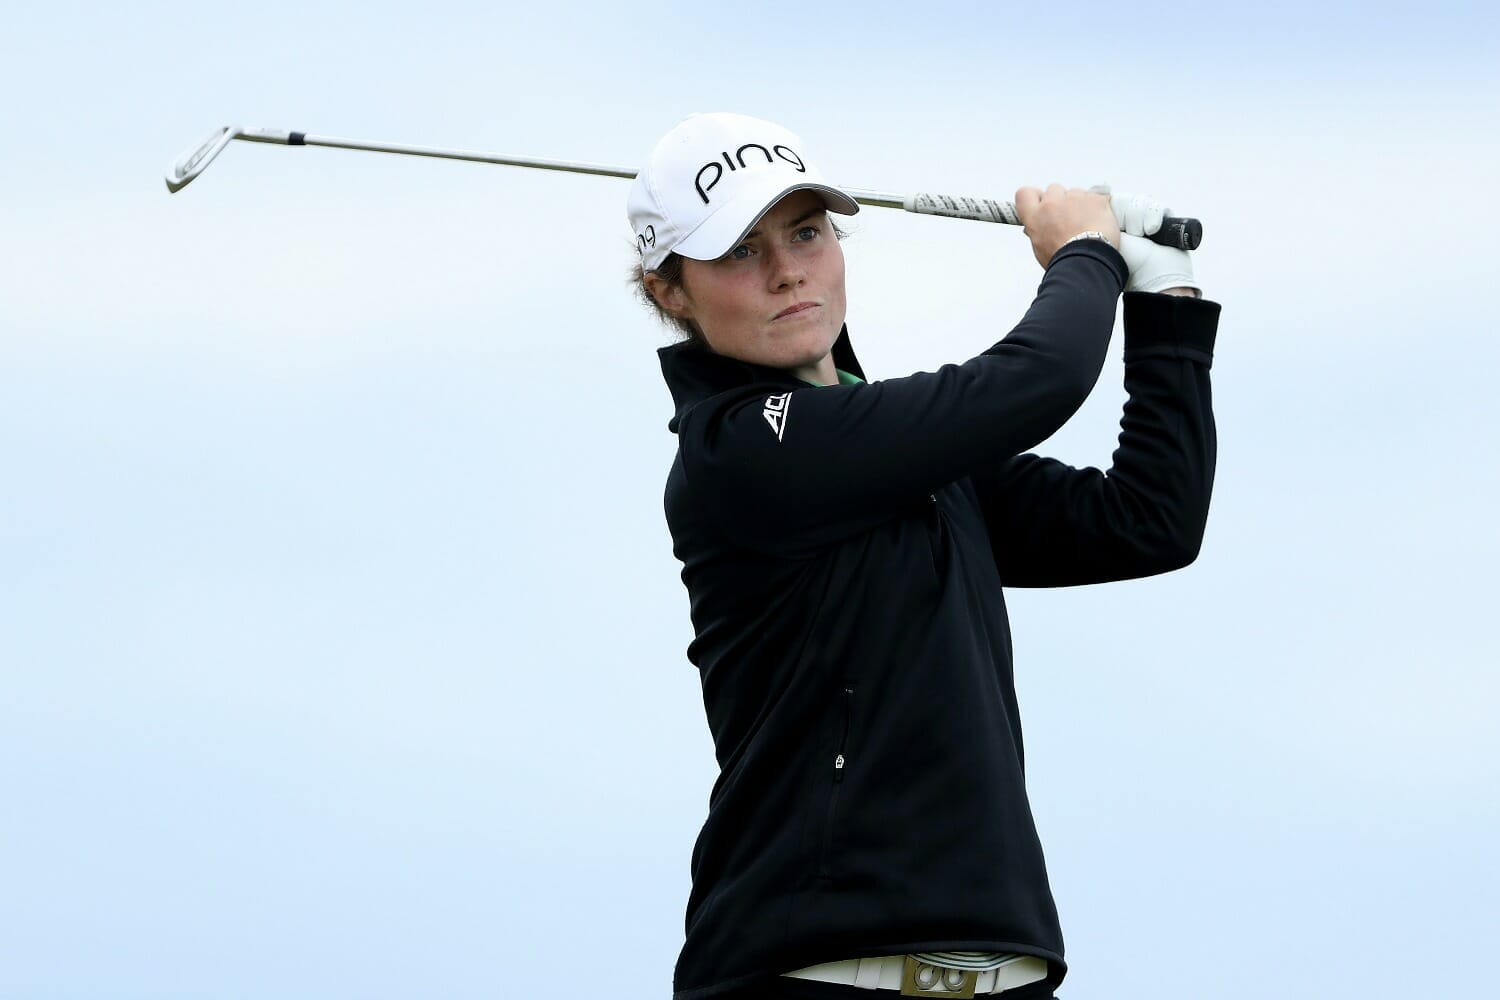 Leona Maguire wins her eighth ACC Golfer of the Month